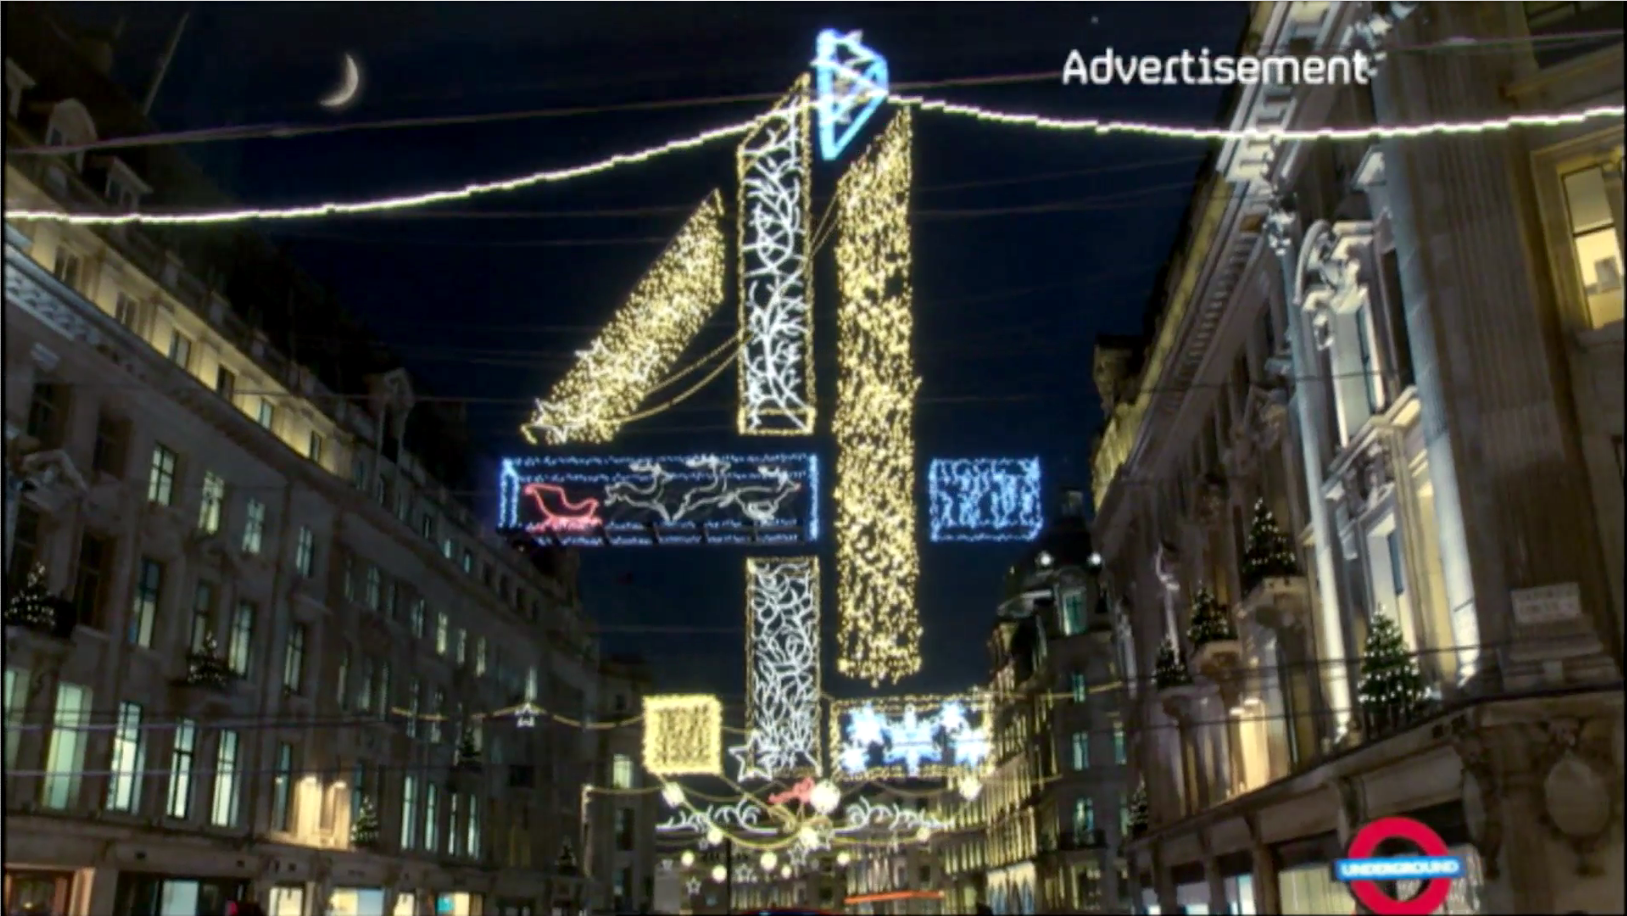 The special Channel 4 ident shot on Oxford St especially for introducing the John Lewis advert